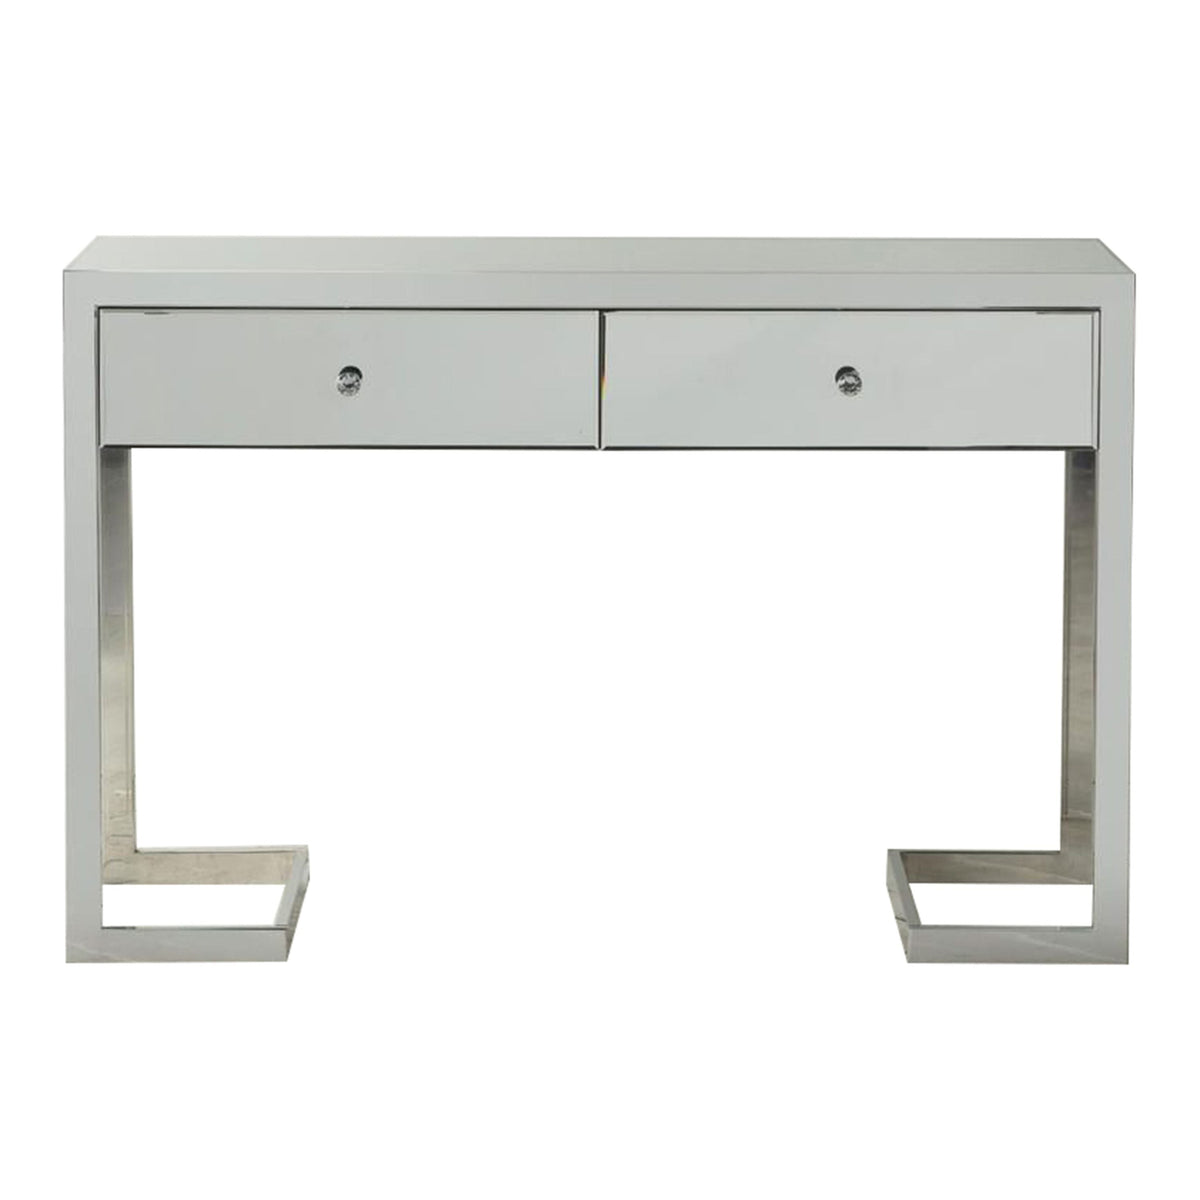 HollowHill 2 Drawer Mirrored Console - Vookoo Lifestyle